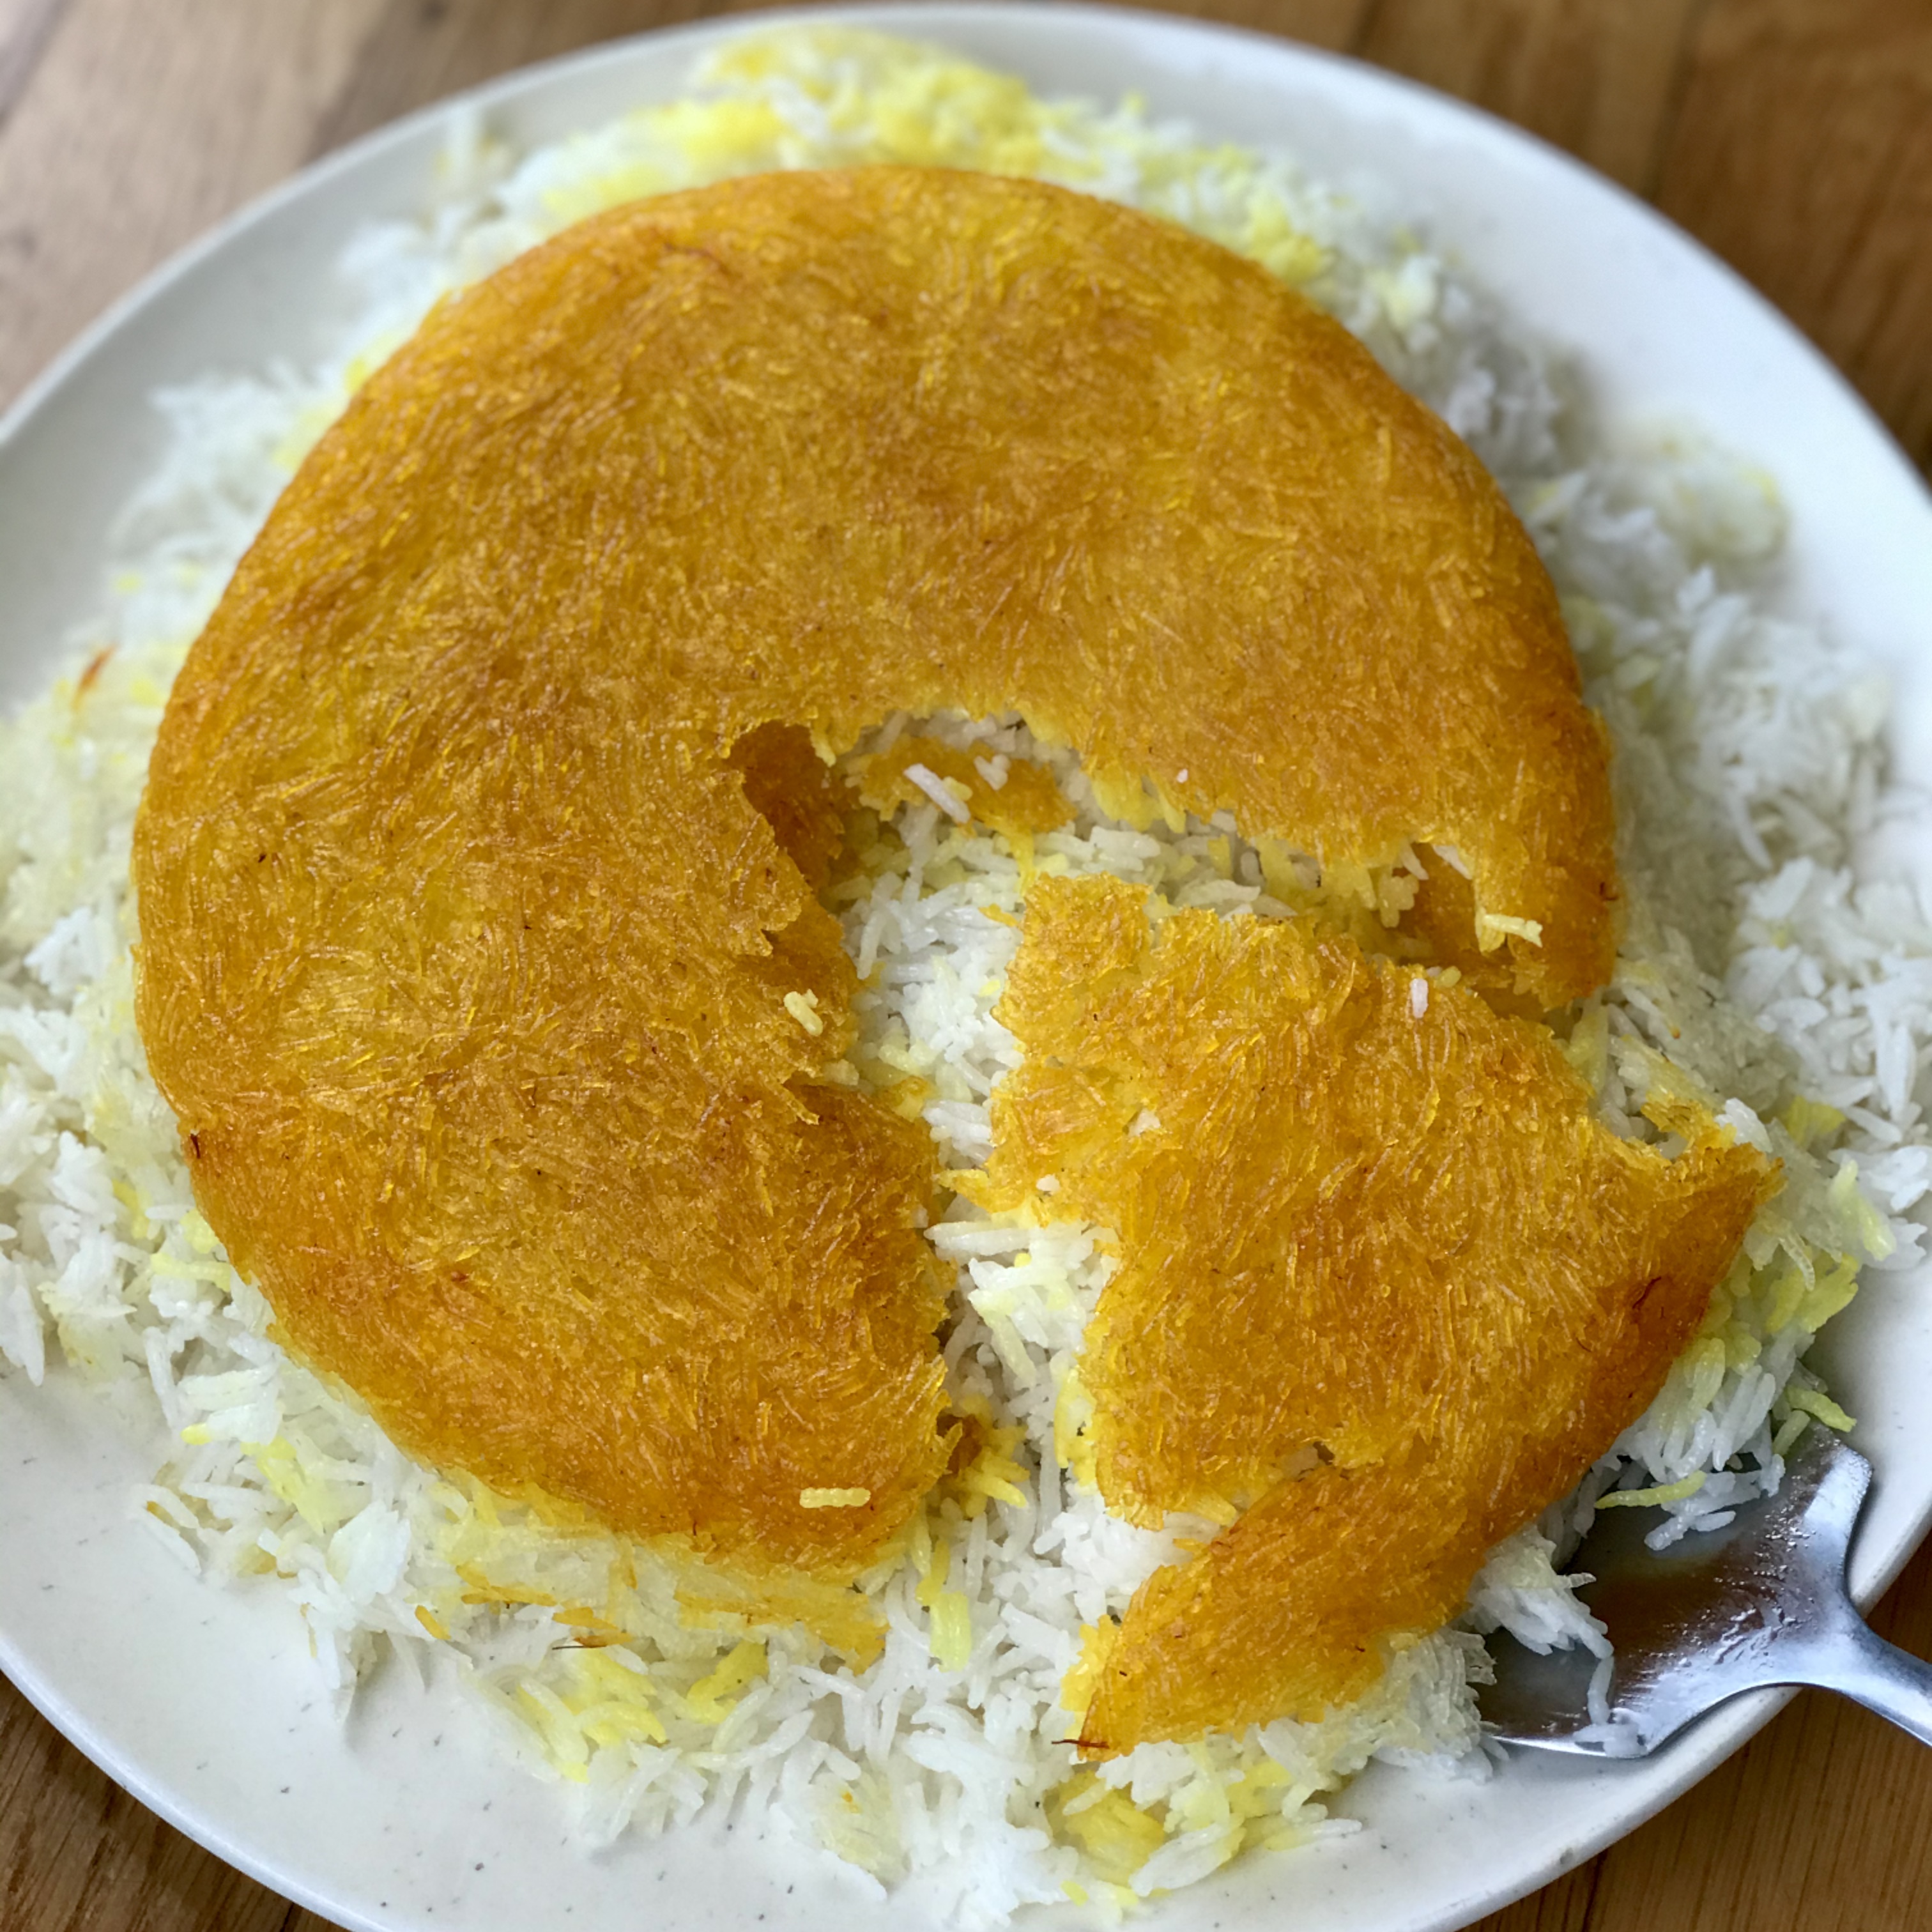 How To Make Persian Rice Using a Rice Cooker